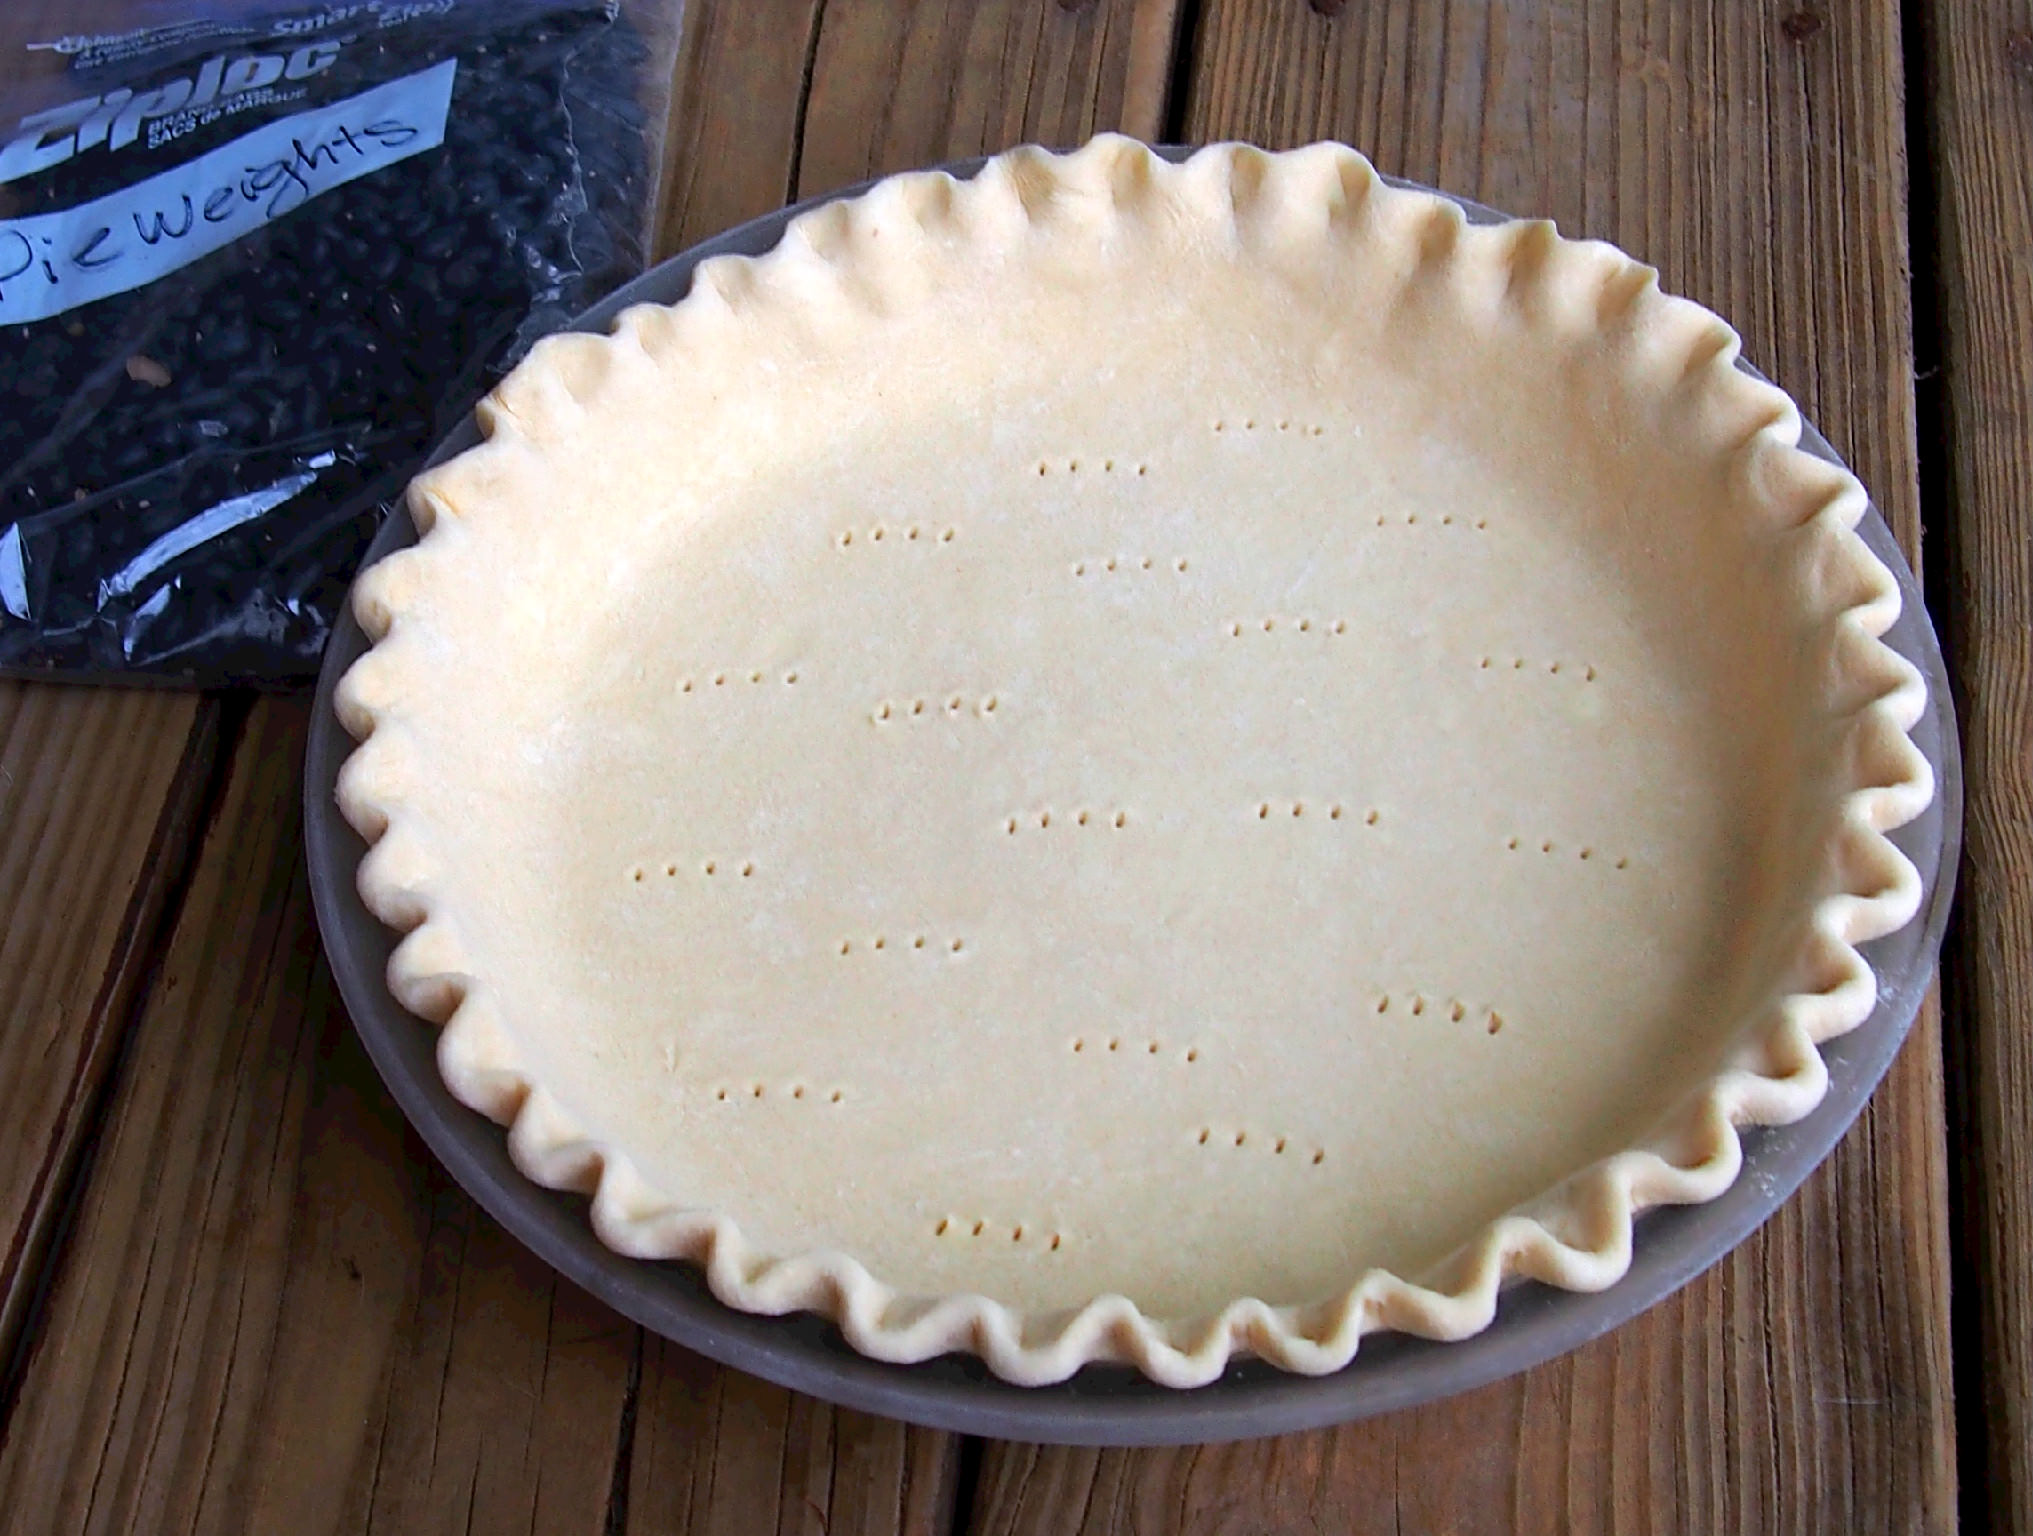 unbaked pie shell